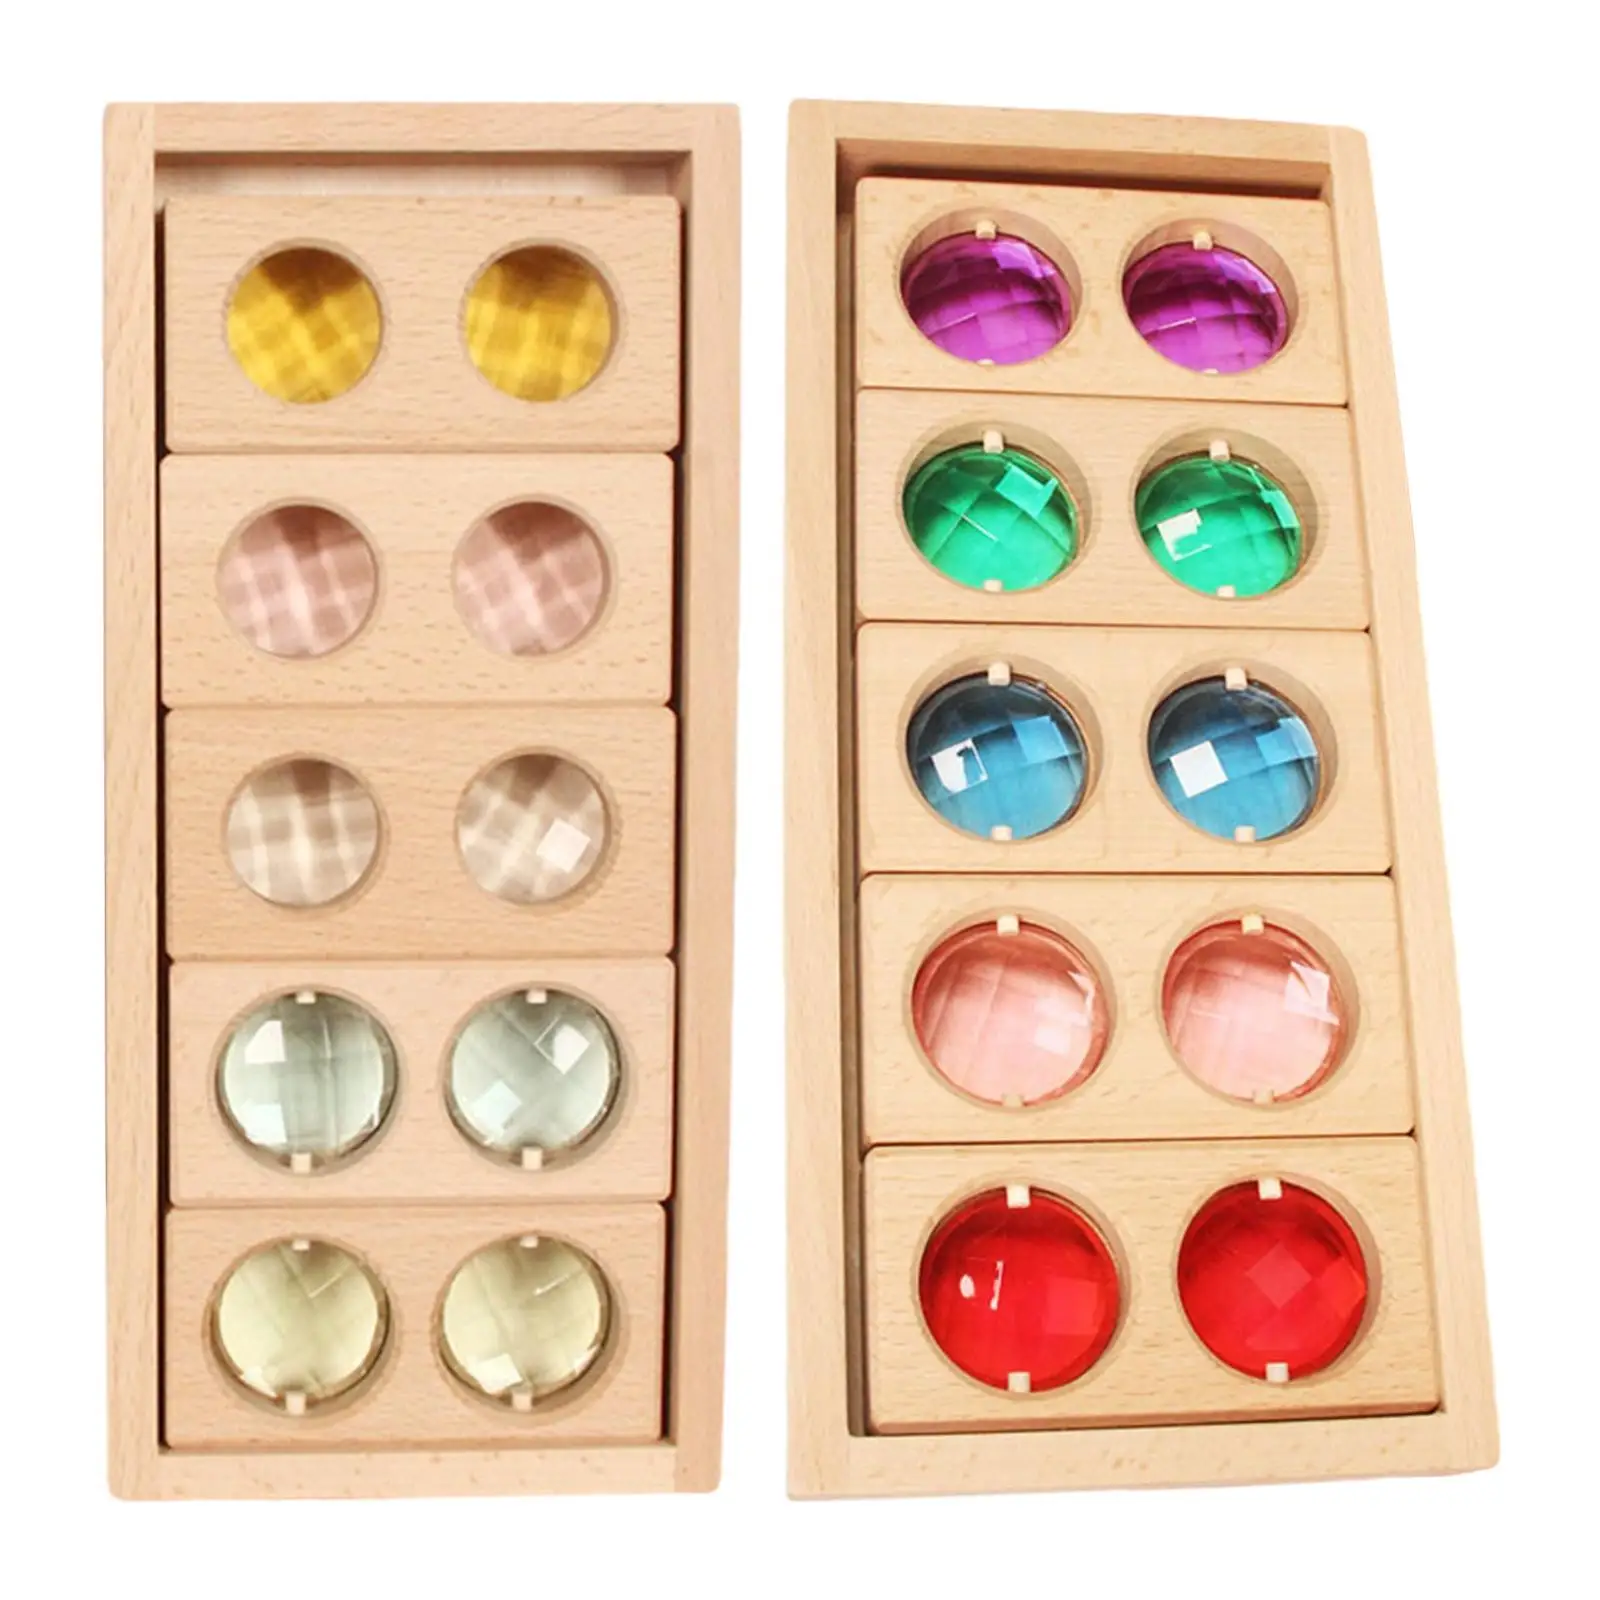 Wooden Toy Translucent Construction Geometric Rainbow GEM Blocks Stacking Blocks Toys for Developing Color Perception Baby Kids